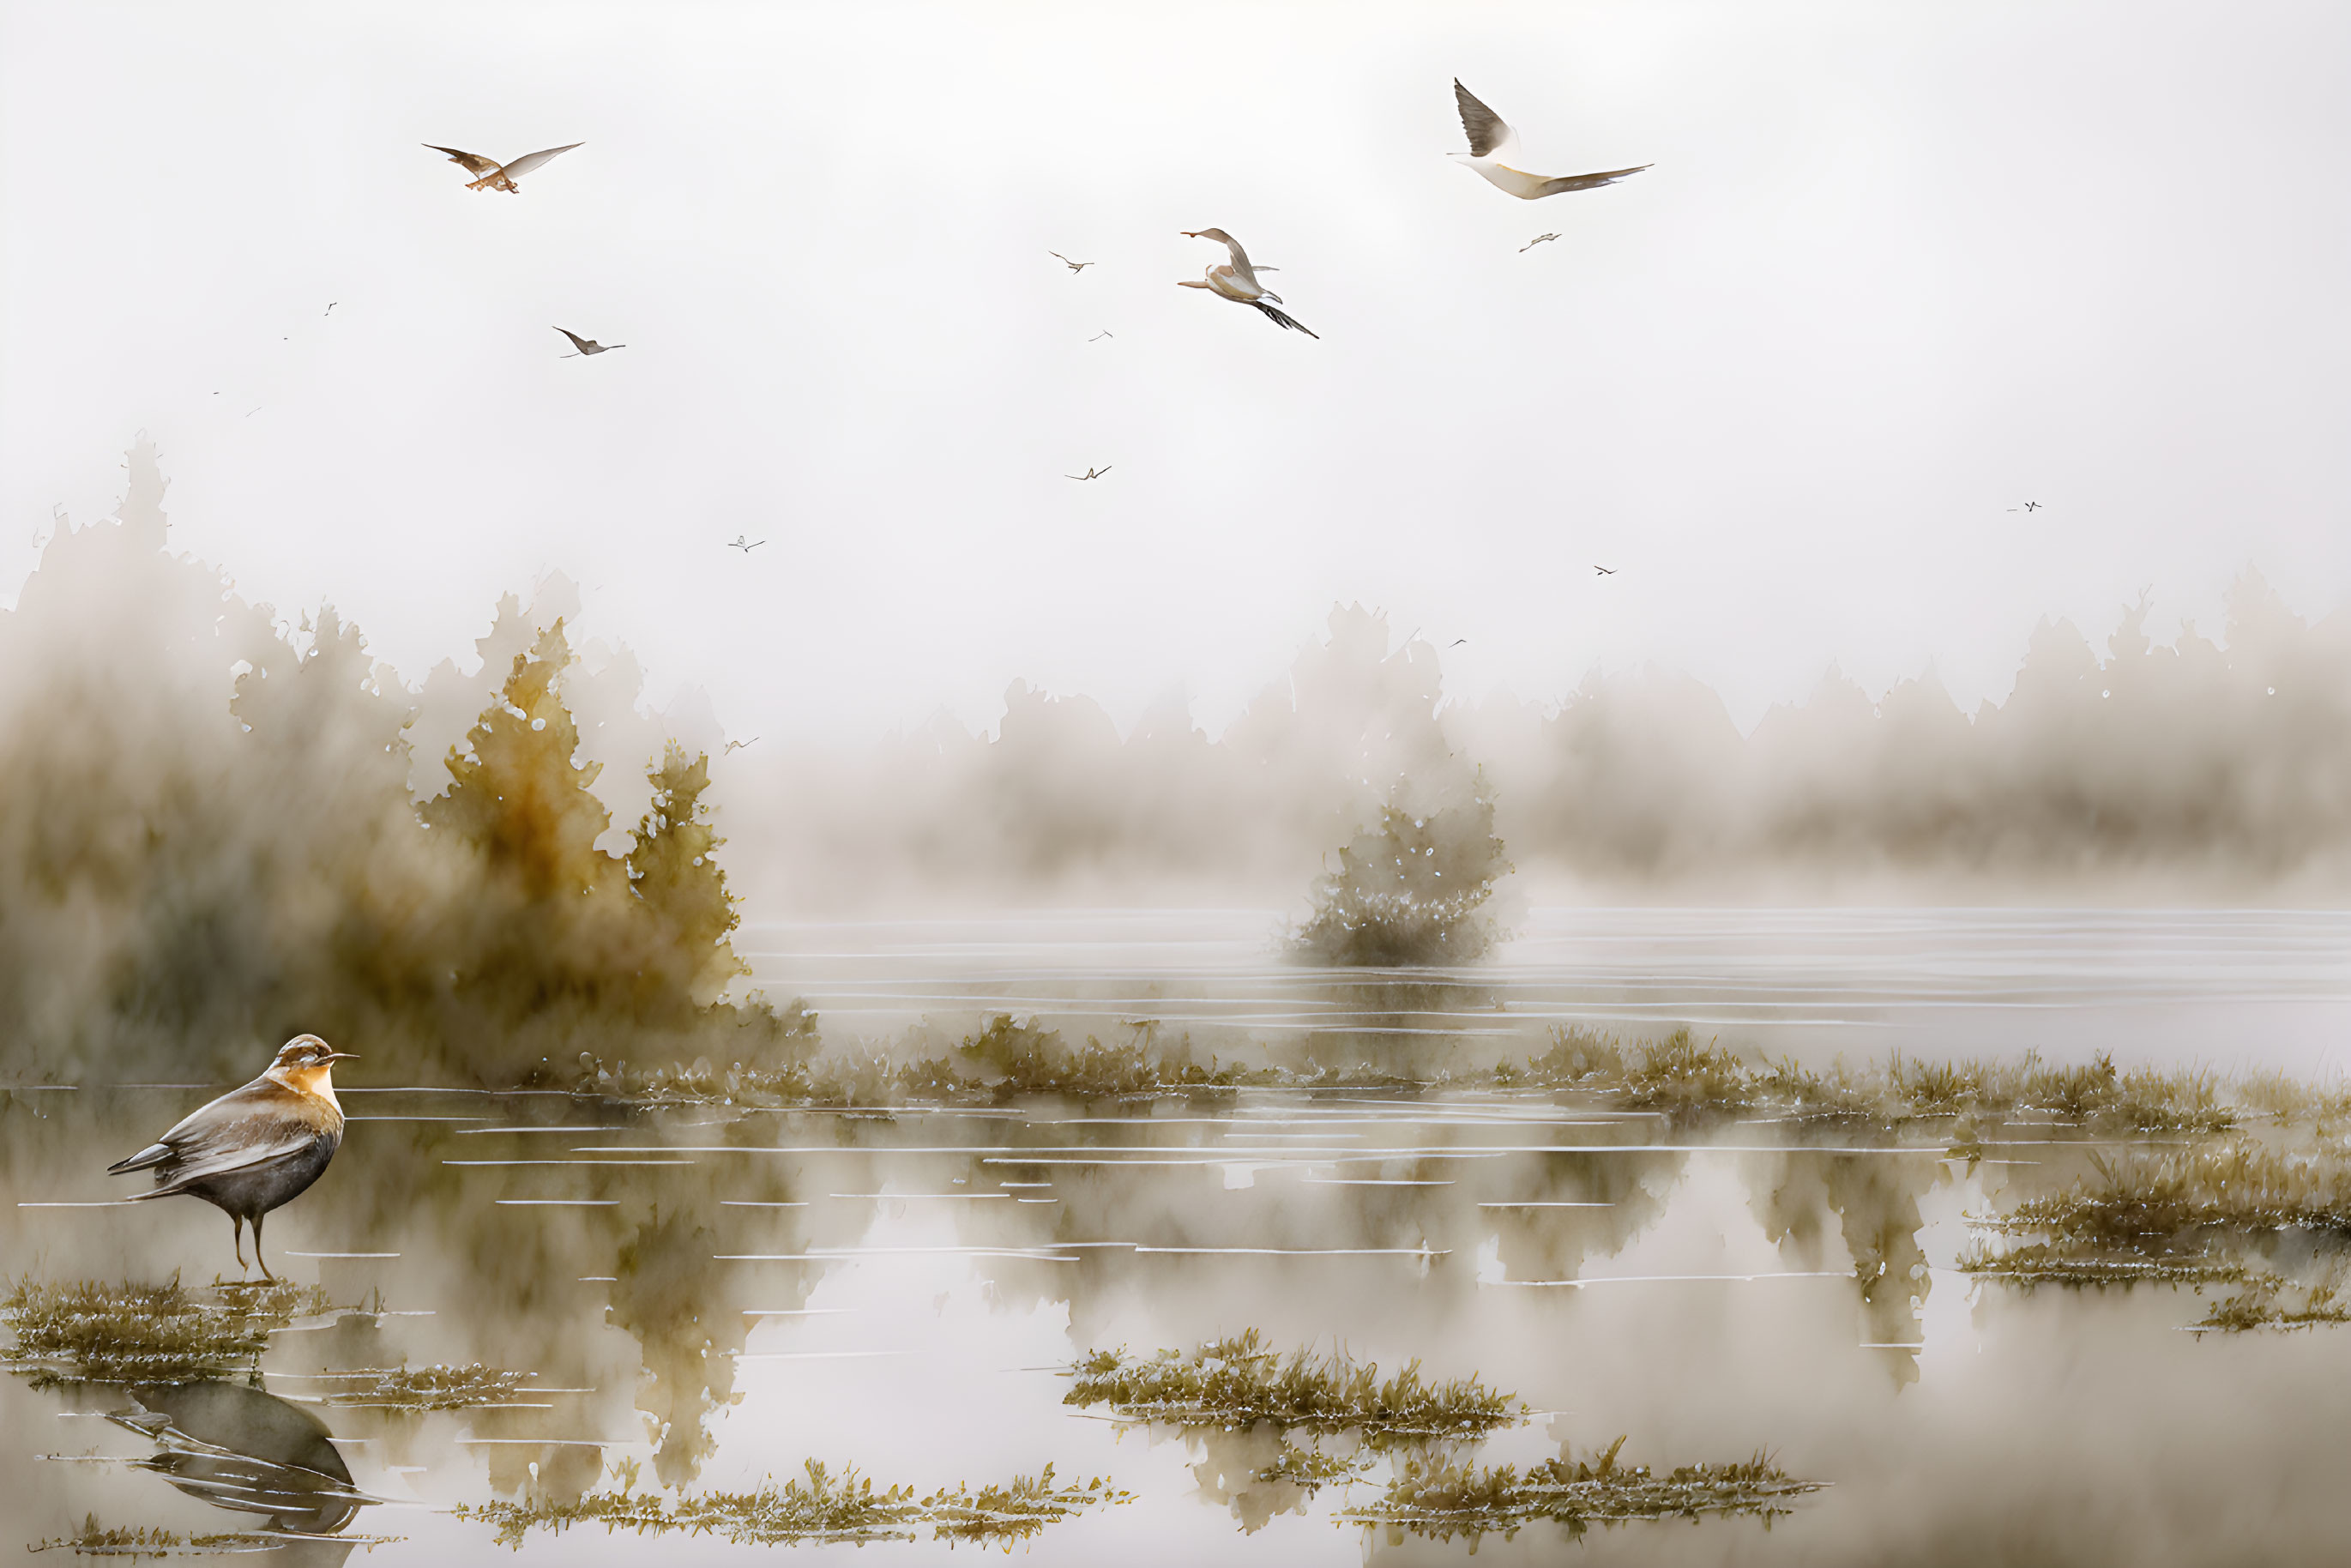 Tranquil bird by water with flying birds in foggy landscape